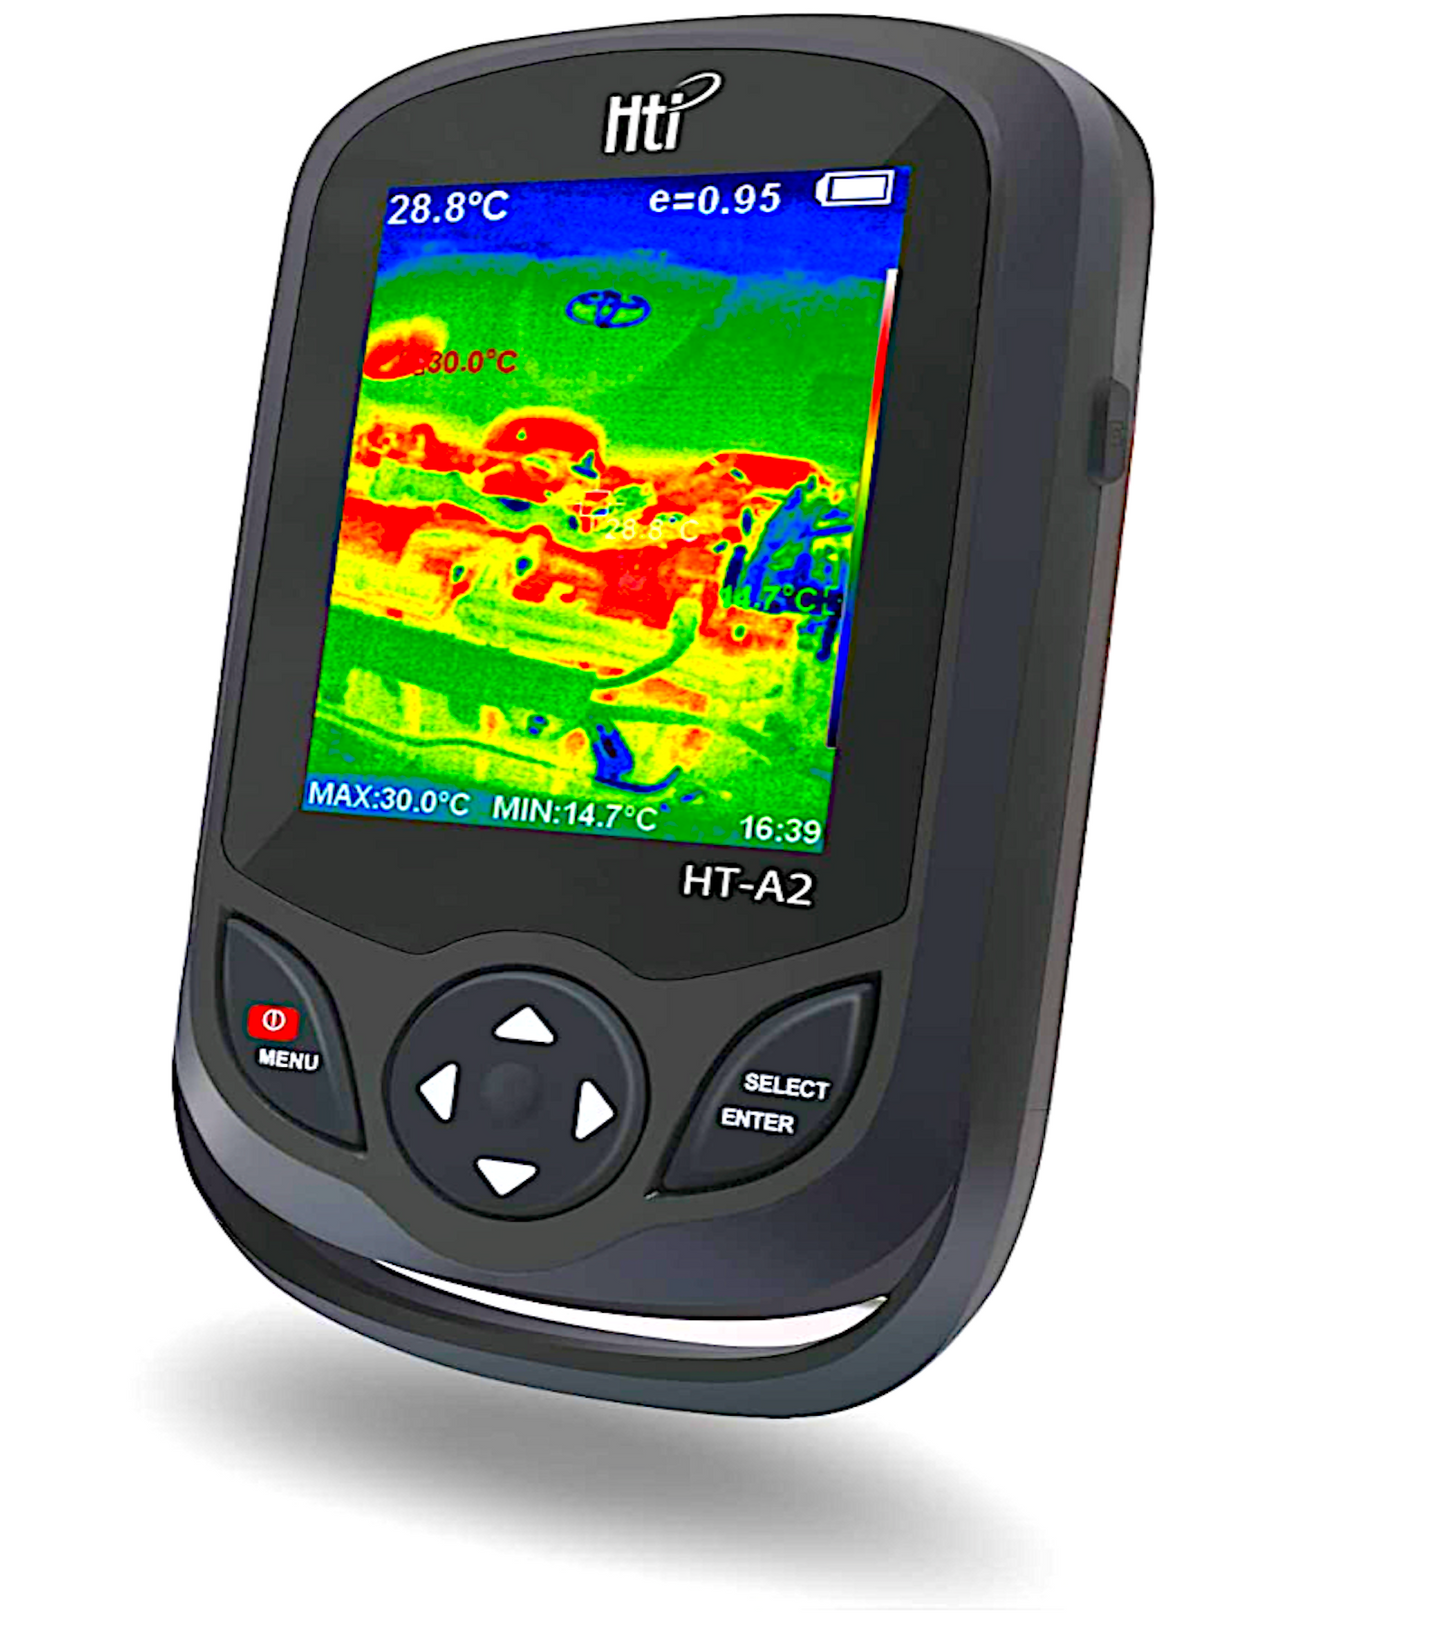 HTI PCOKET-SIZED IR THERMAL CAMERA: with real-time, 320x240 IR resolution